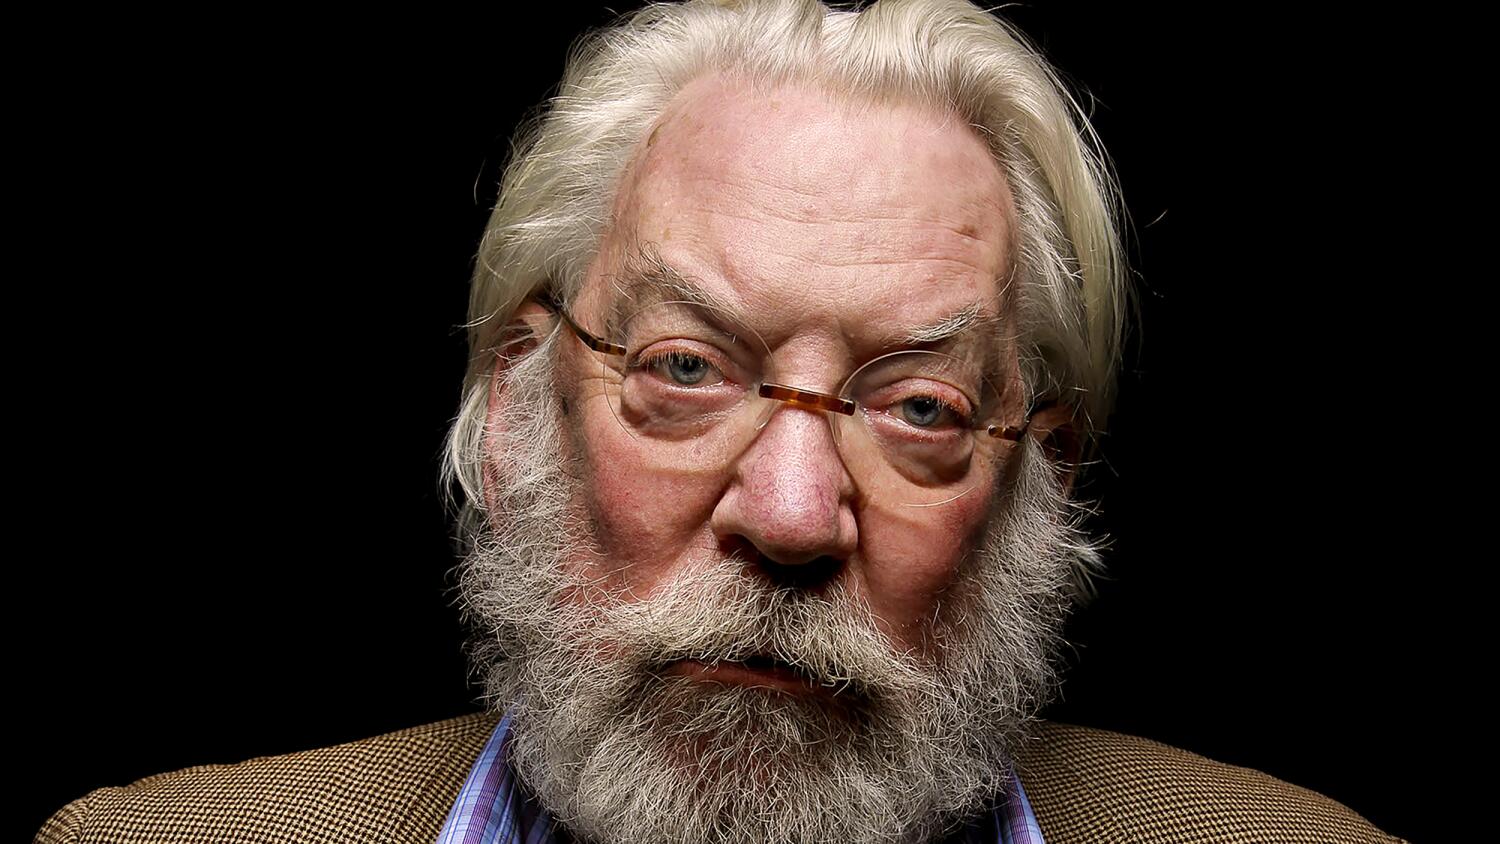 Donald Sutherland, stately star of 'MASH,' 'Ordinary People' and 'Hunger Games,' dies at 88